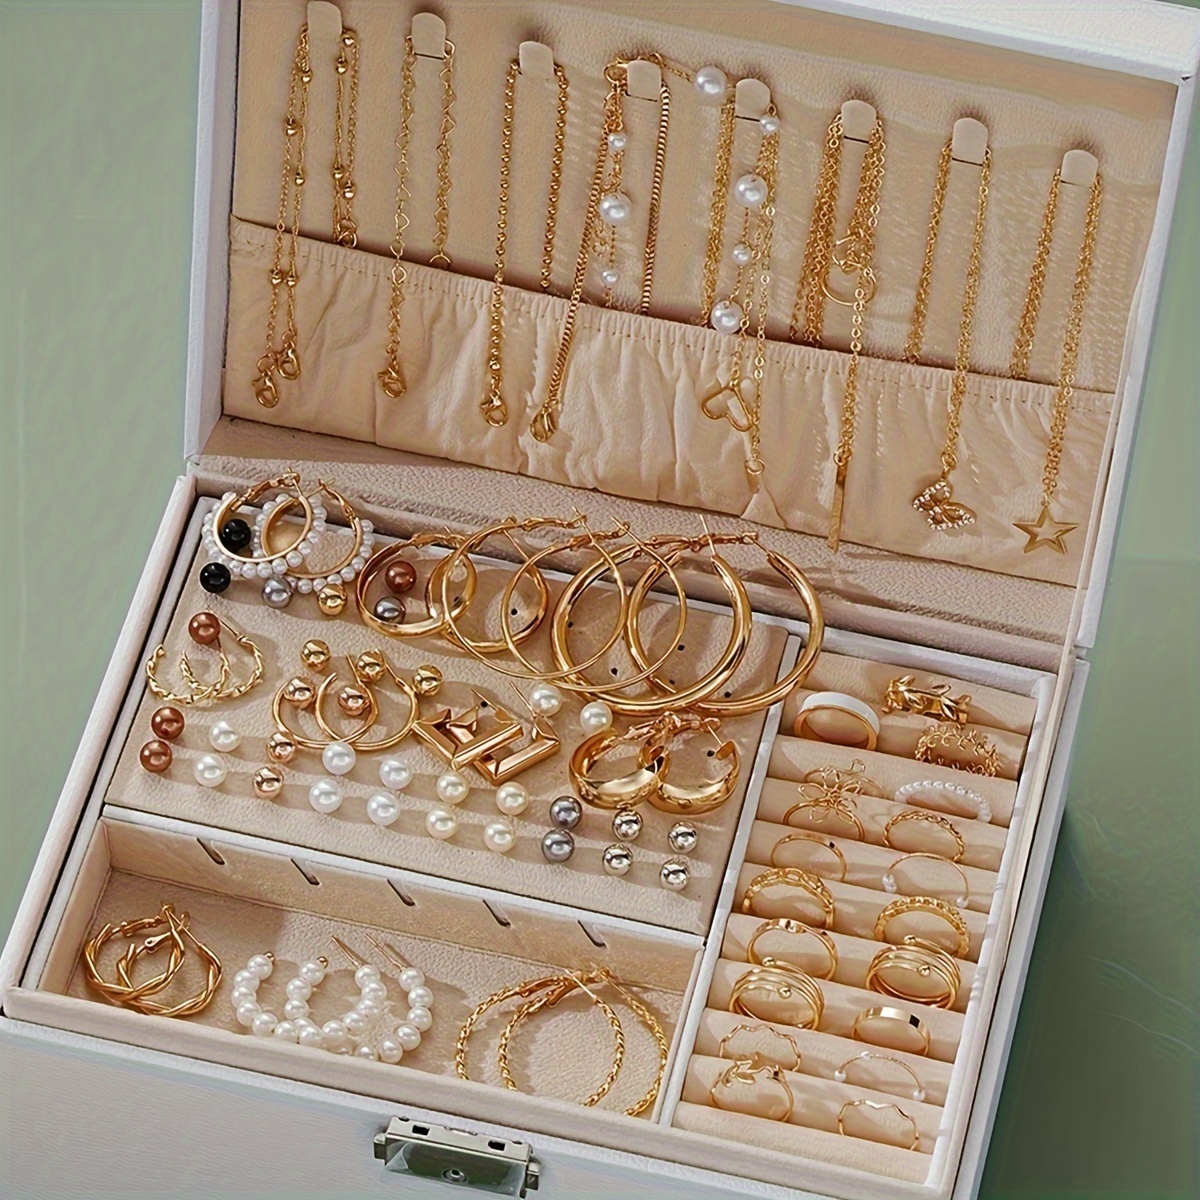 

Luxury 91-piece Jewelry Set For Women - Geometric, Heart, Floral, Butterfly, Star & Faux Pearl Earrings, Studs, Necklaces, Rings - Chic Vacation & Everyday Wear Accessory Gift Set (no Box)